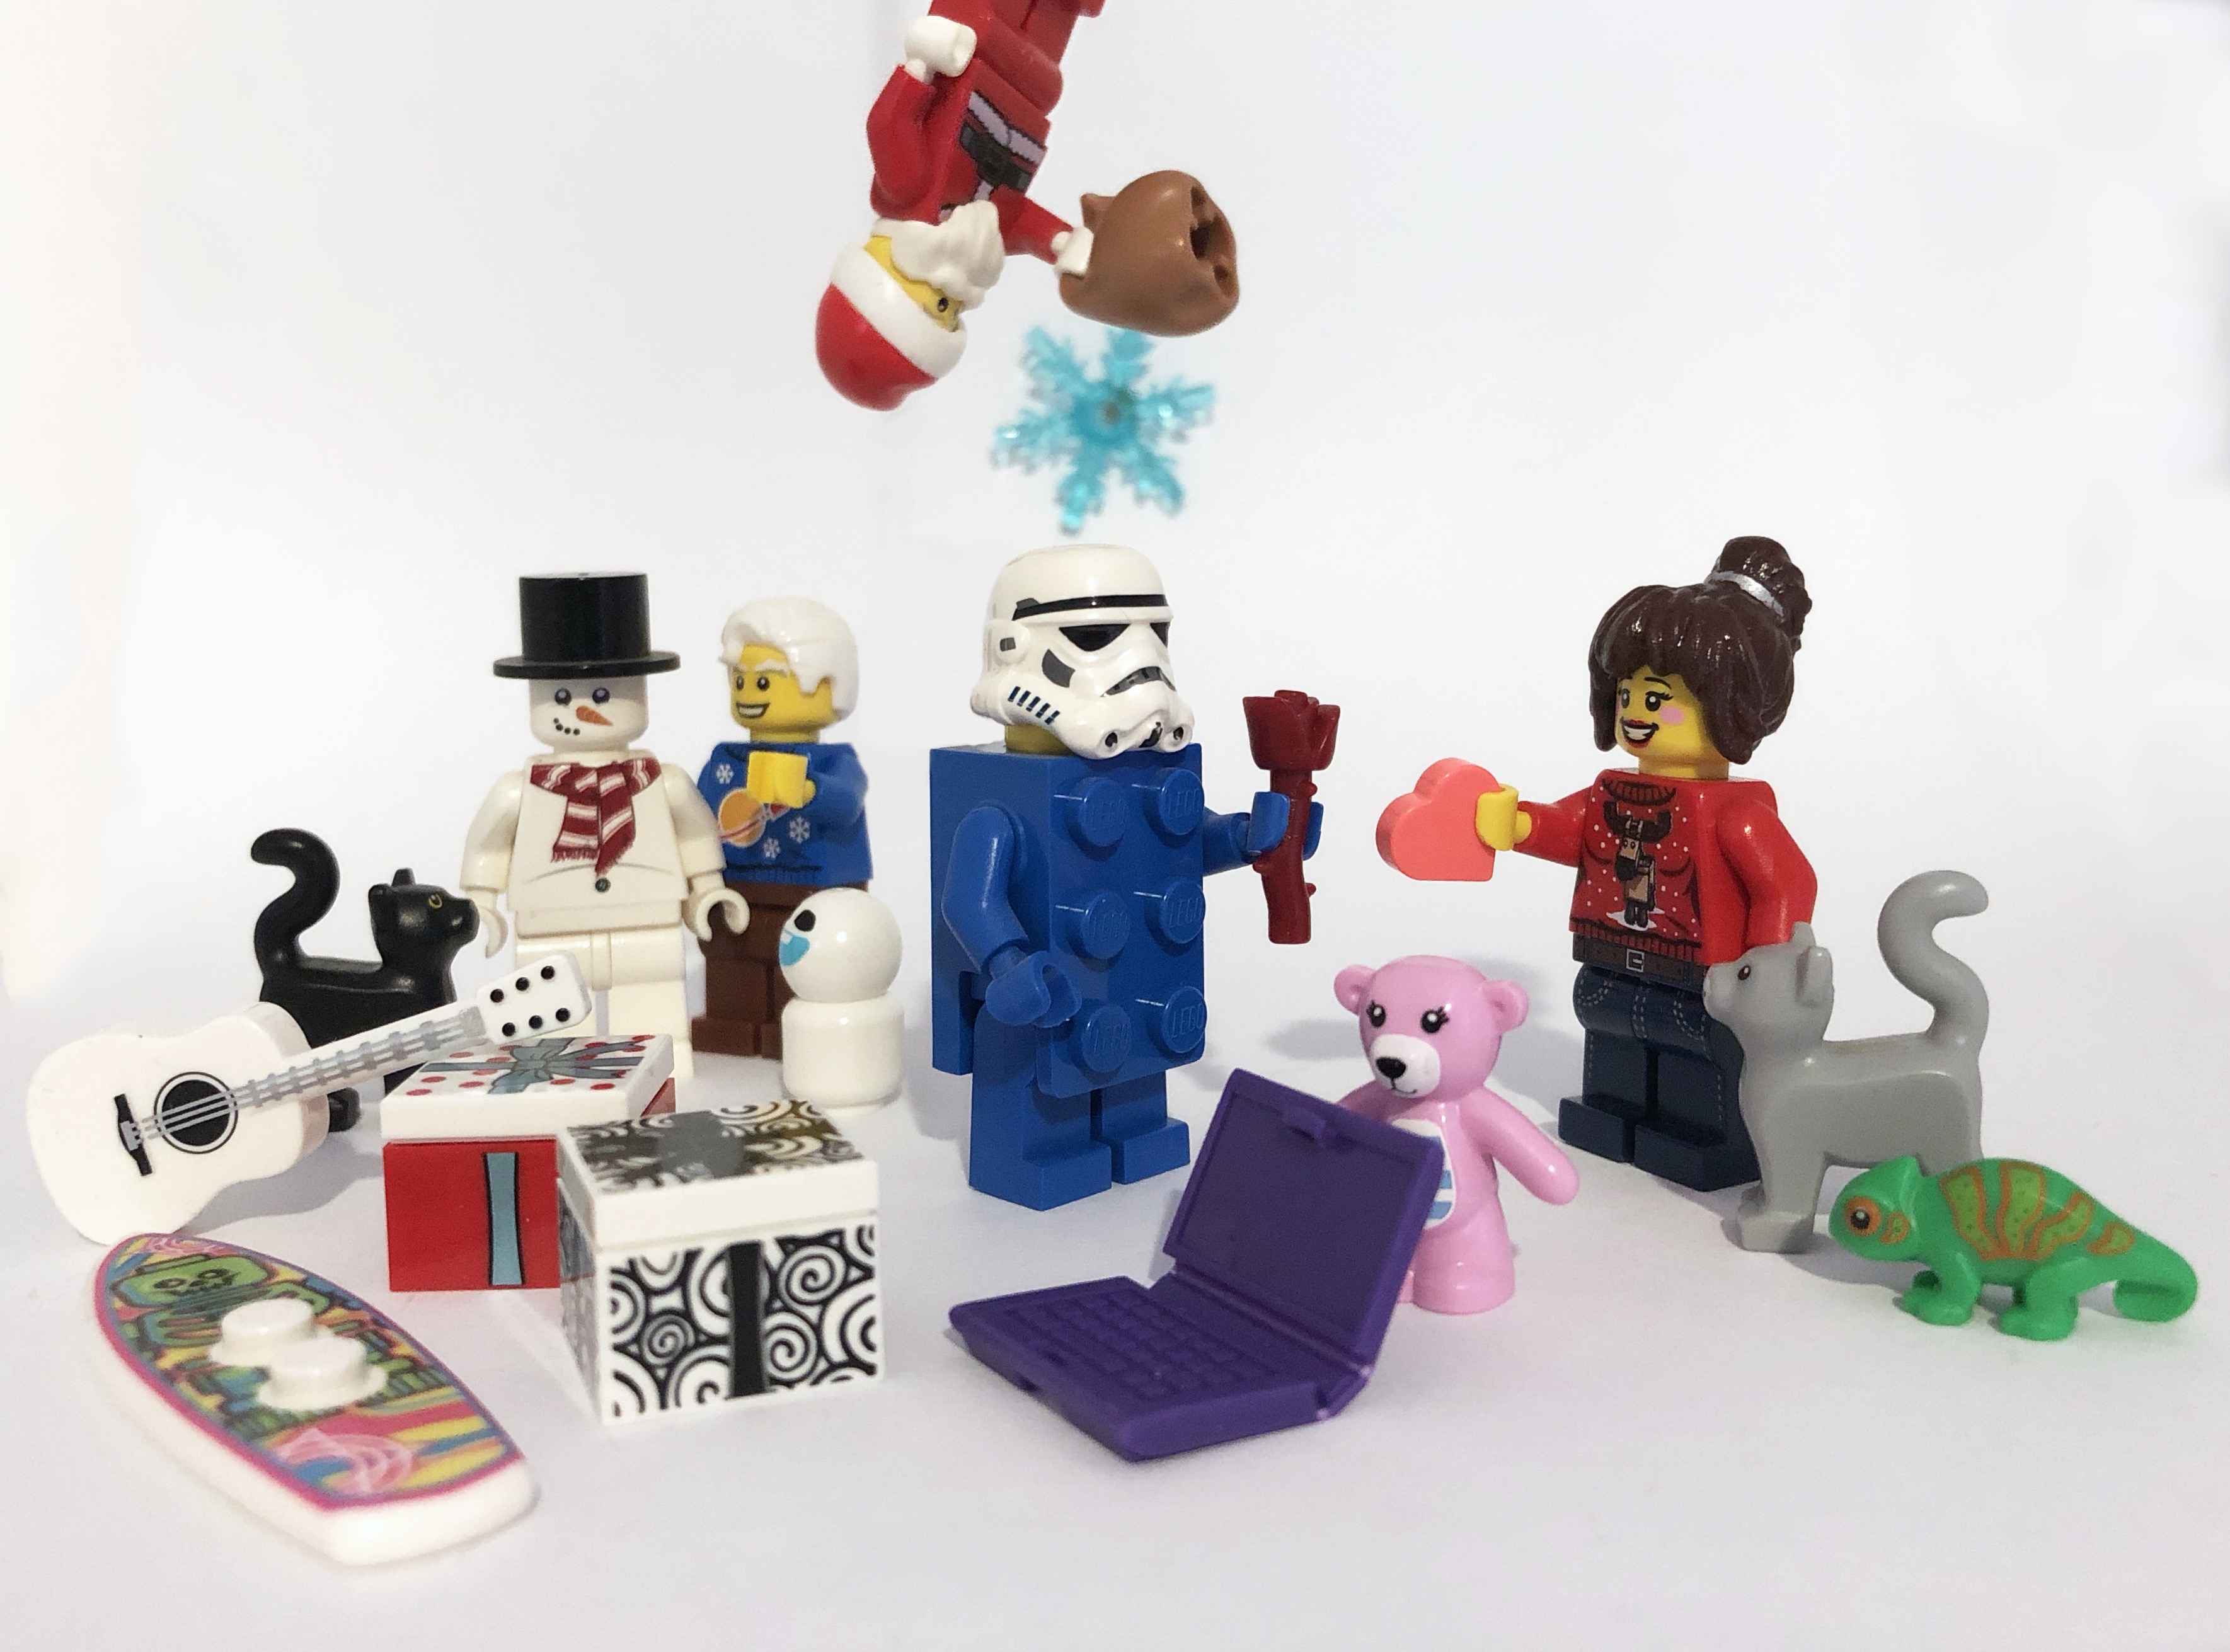 The LEGO Christmas Catalog Your Minifigures Have Been Waiting For